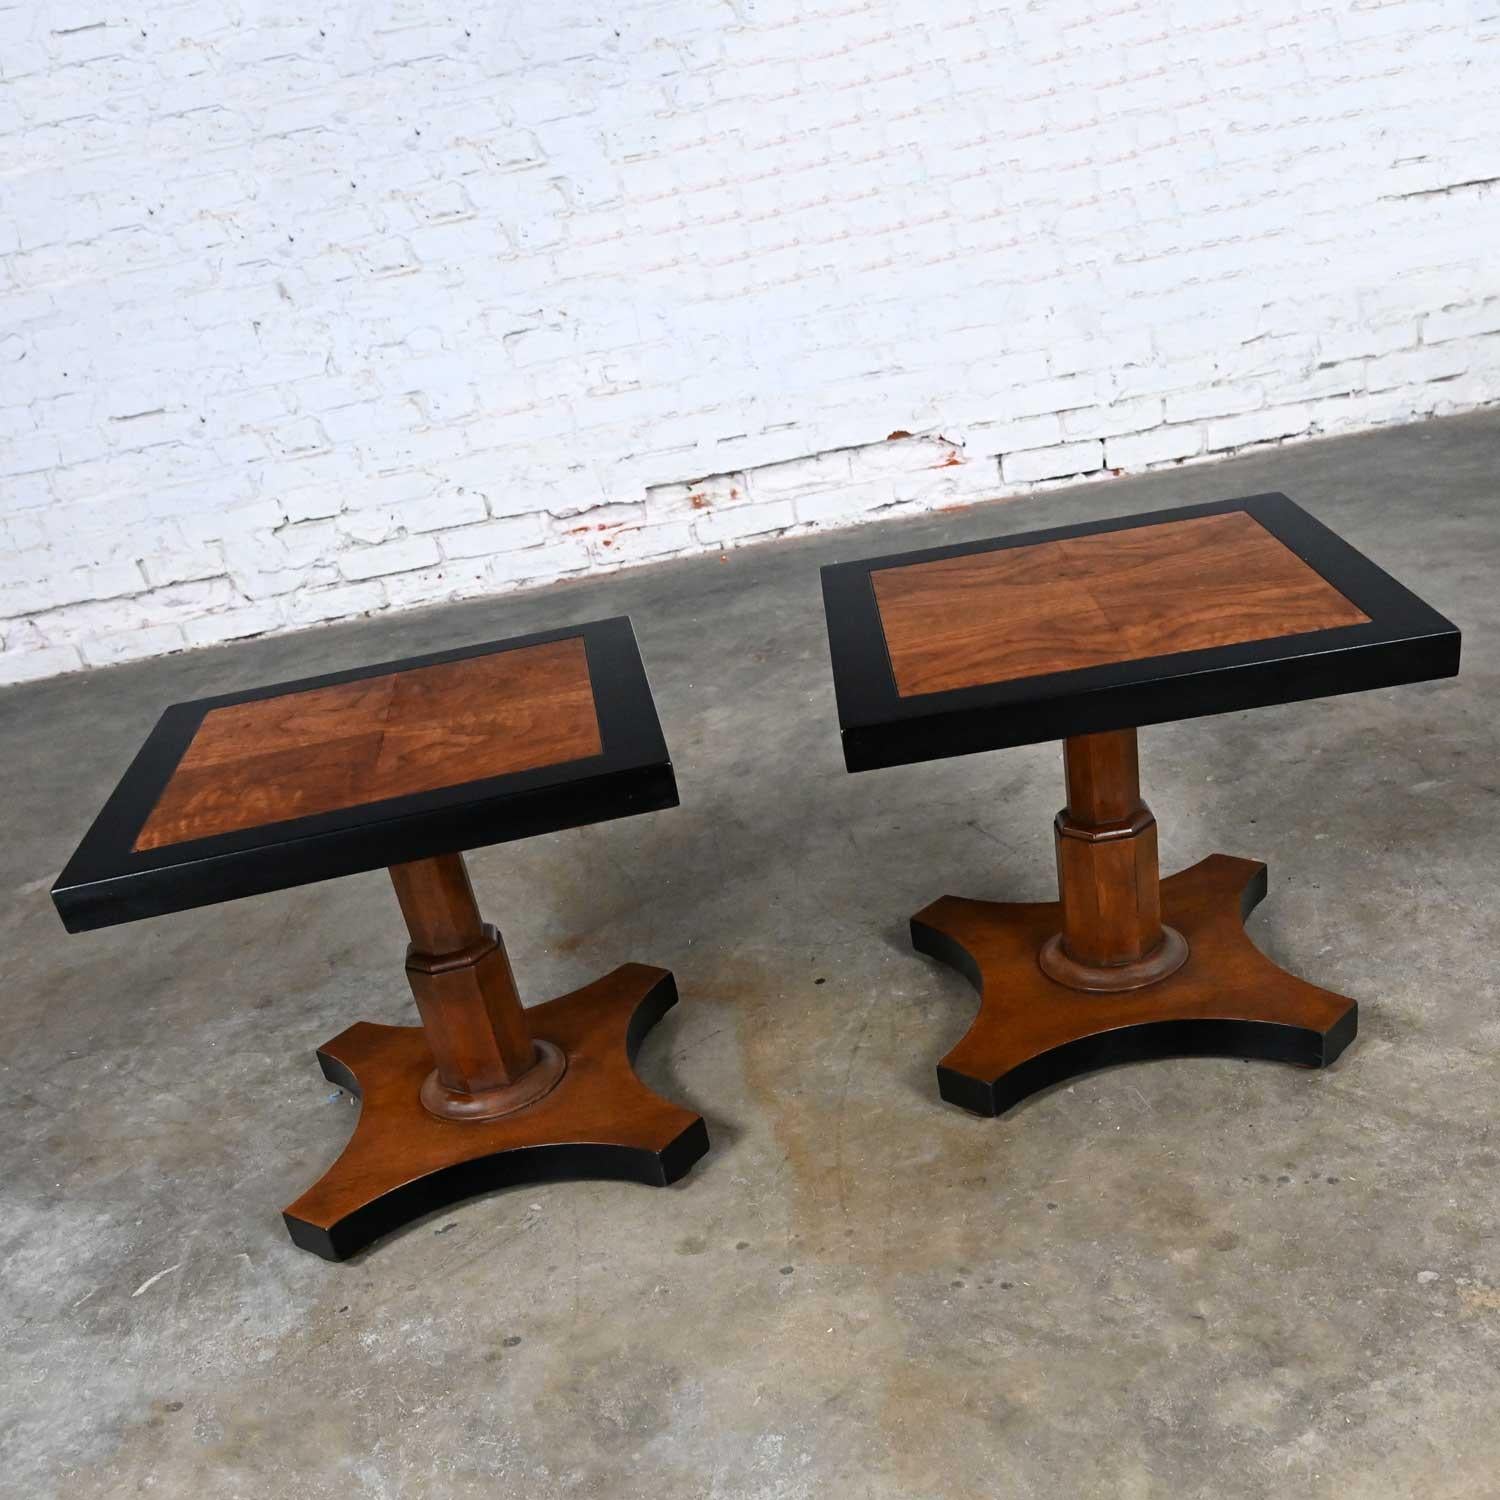 Fabulous Vintage Baker furniture campaign style pedestal end tables, a pair with a black and natural finish. Beautiful condition, keeping in mind that these are vintage and not new so will have signs of use and wear. The framed edges of the tabletop